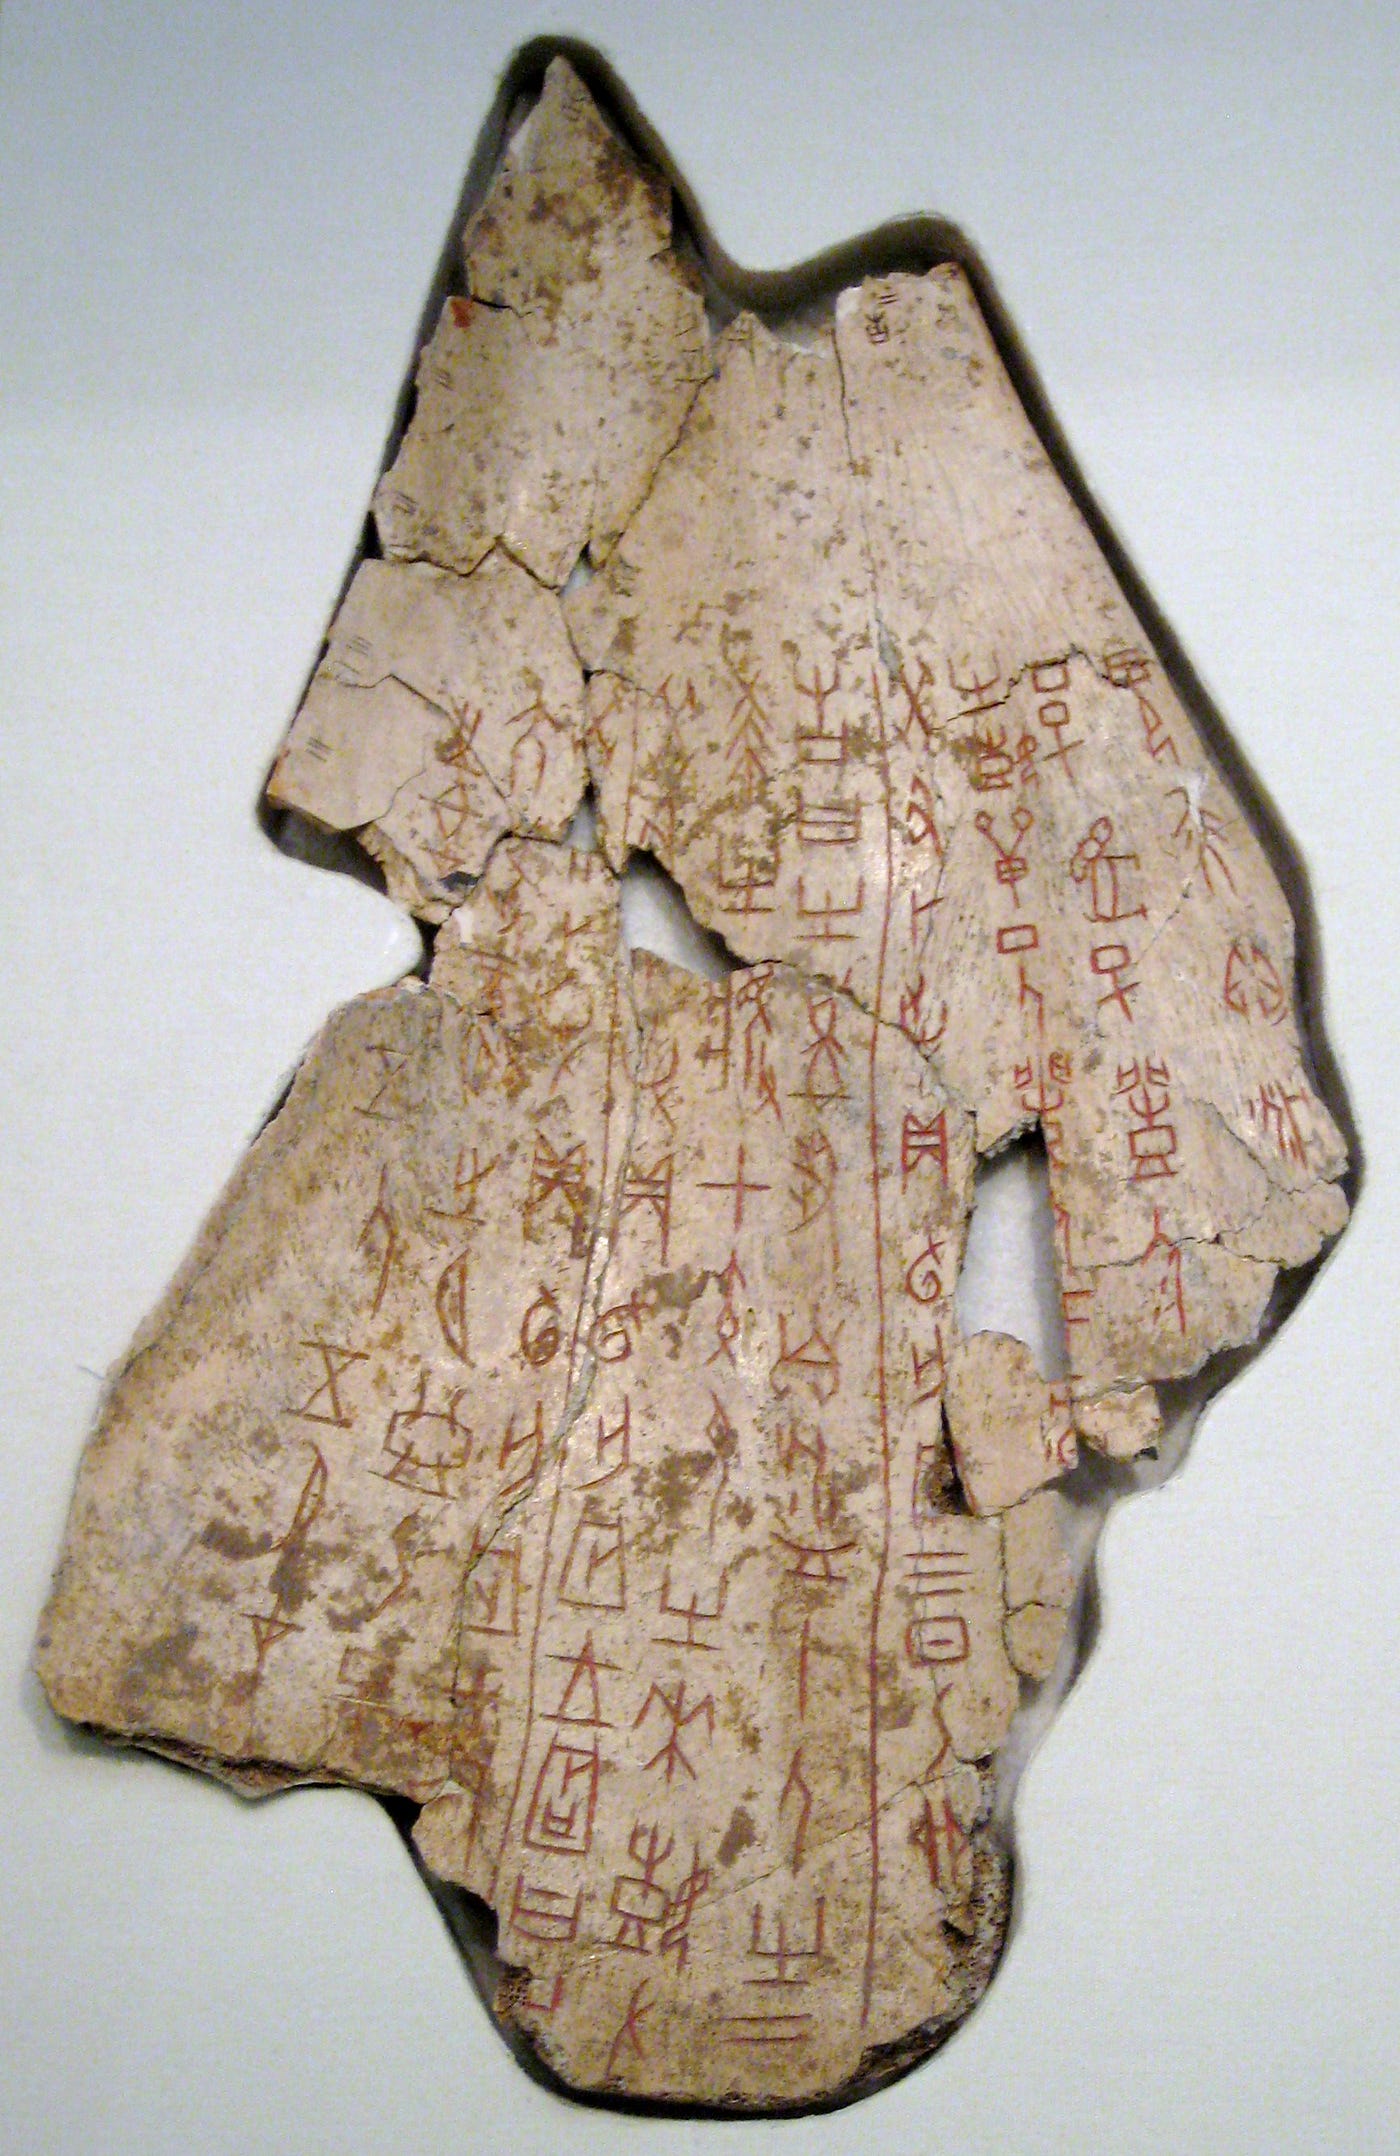 What is the earliest known piece of writing and where was it found